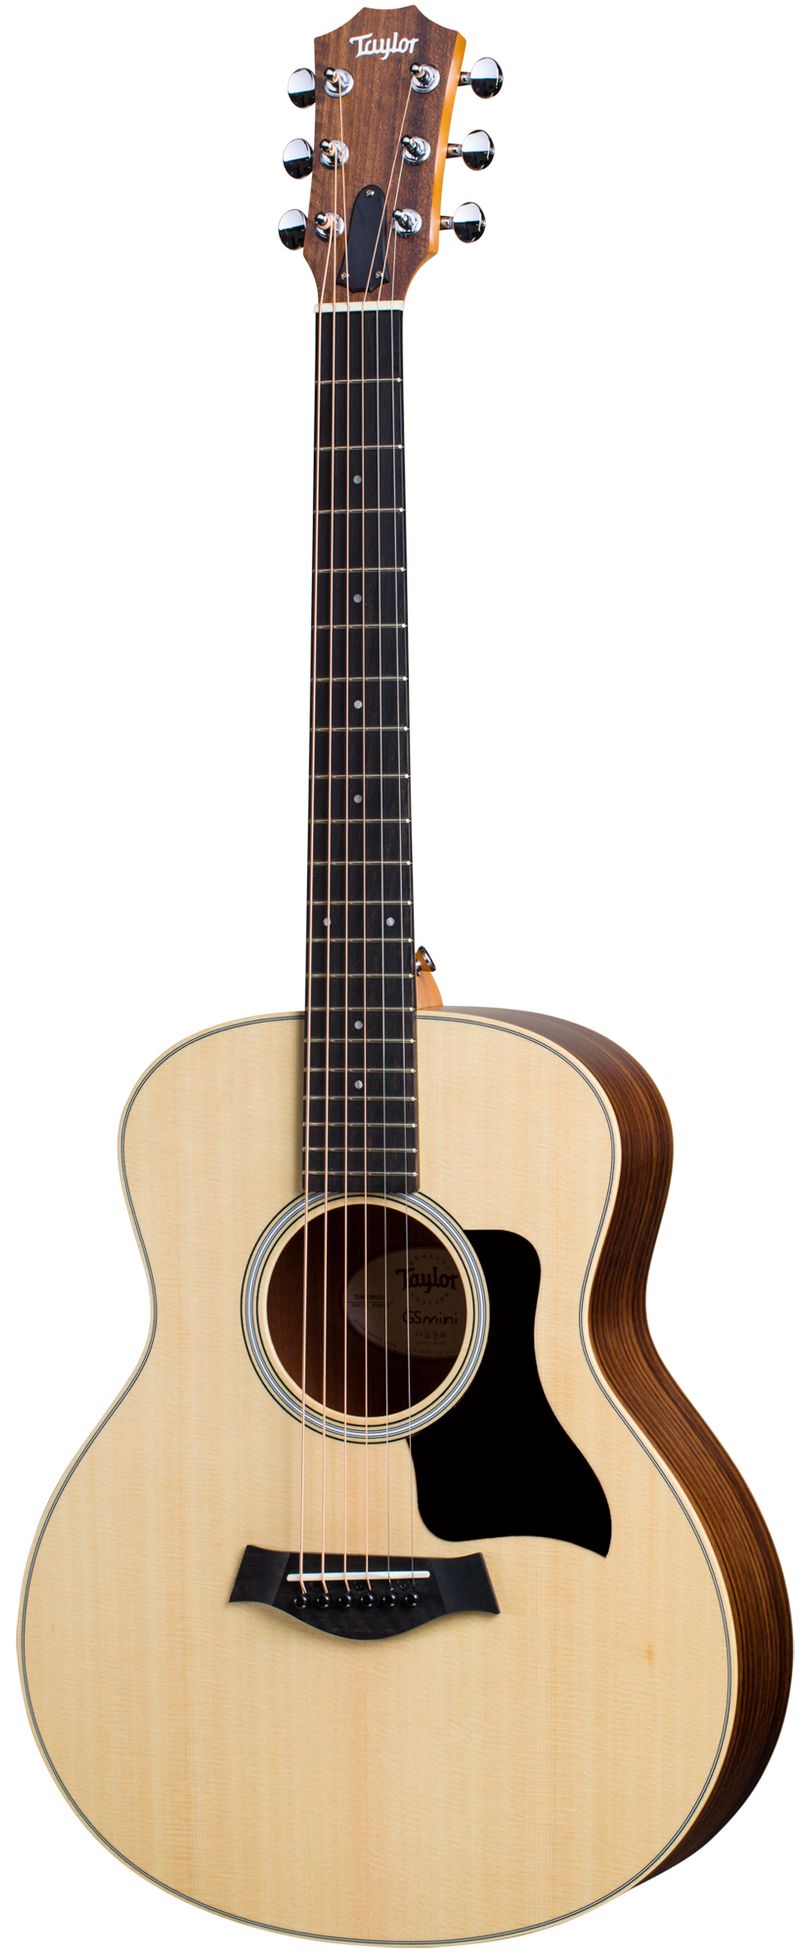 Taylor GS Mini-e Rosewood - Sitka Spruce / Layered Rosewood